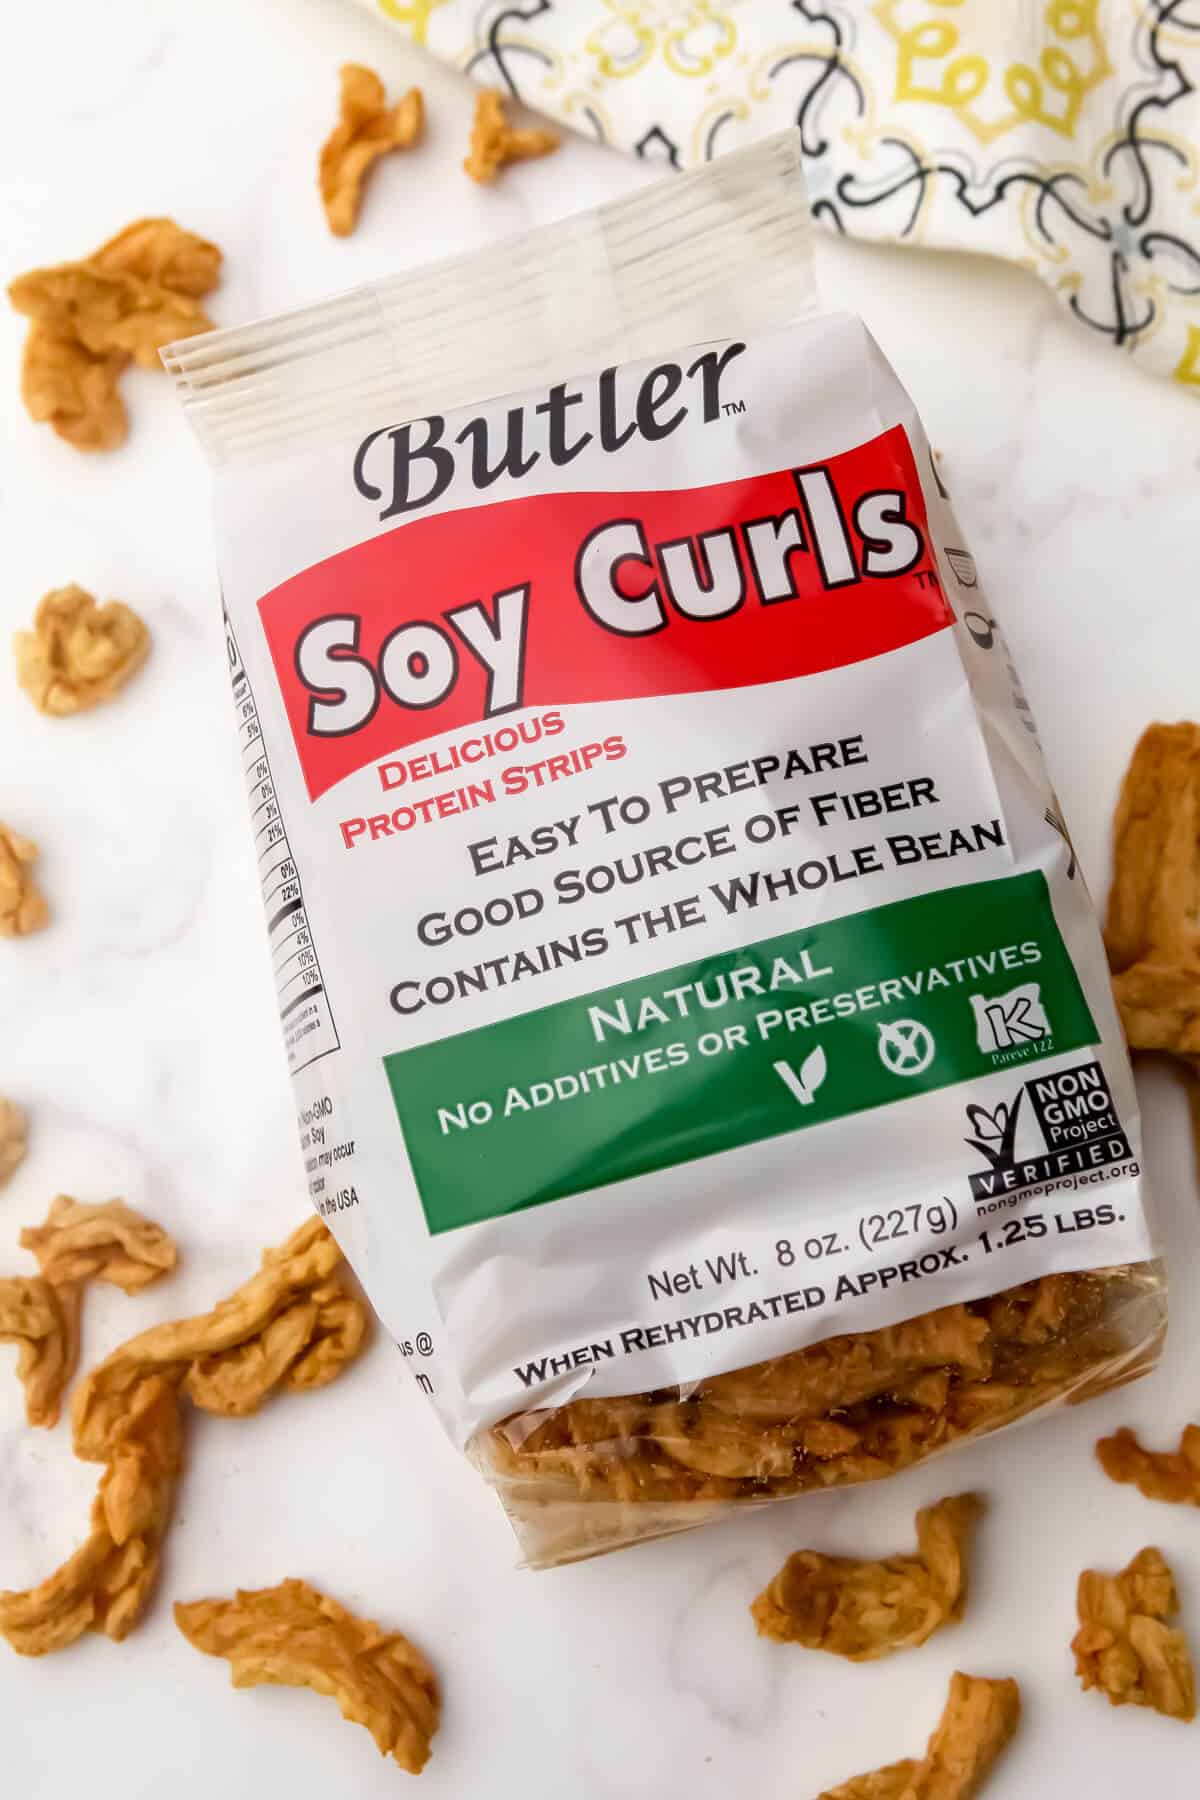 A bag of Butler Soy Curls with soy curls around it.